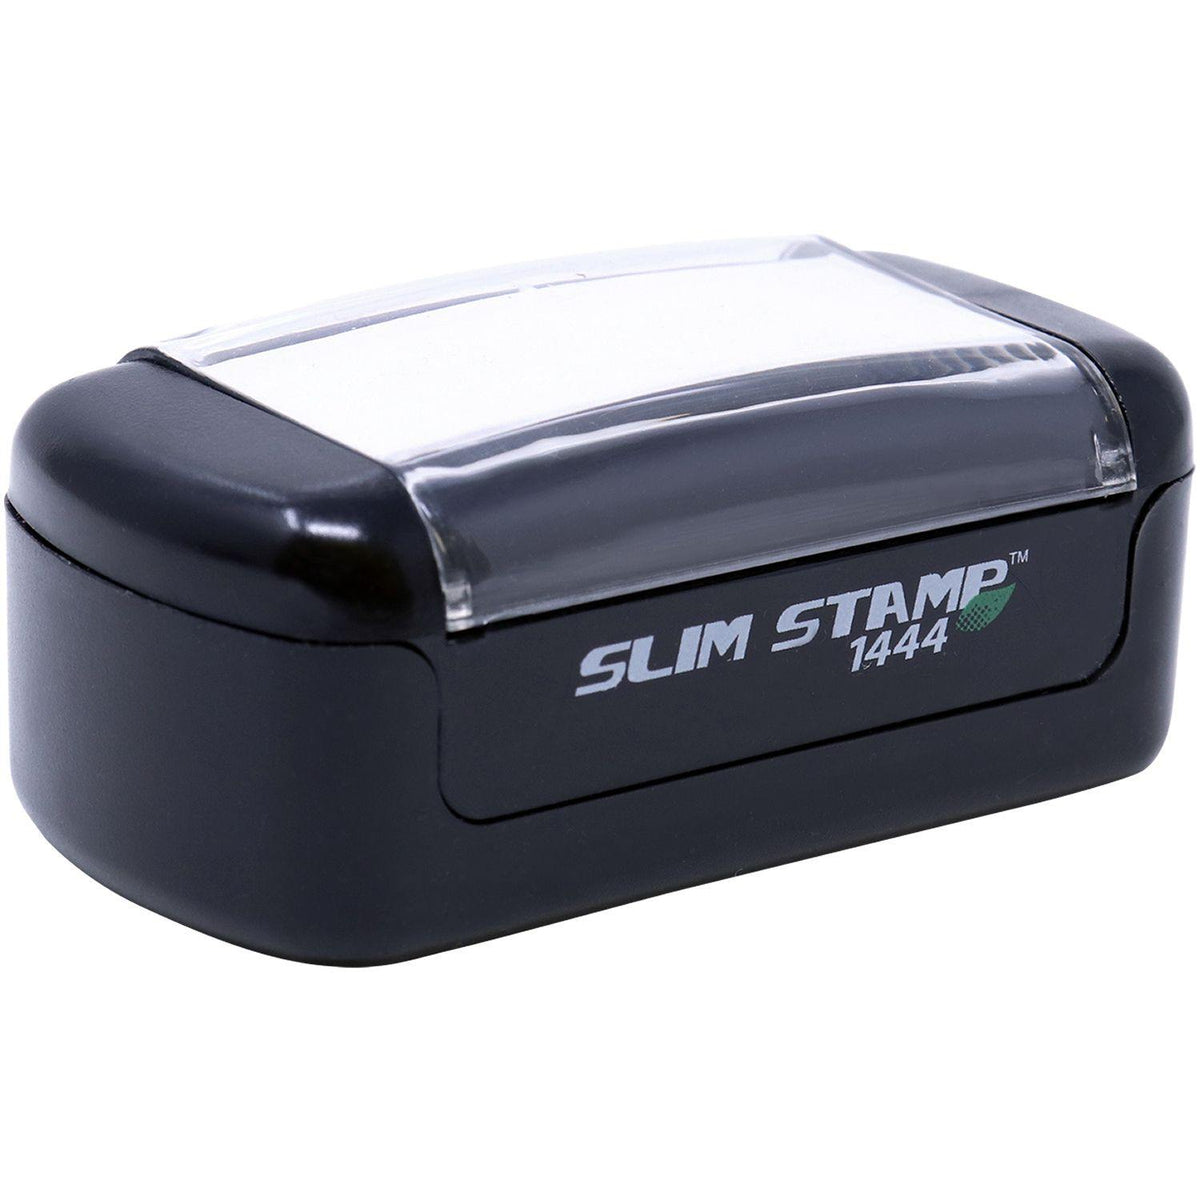 Alt View of Slim Pre-Inked Fax Memo Stamp Mount Angle